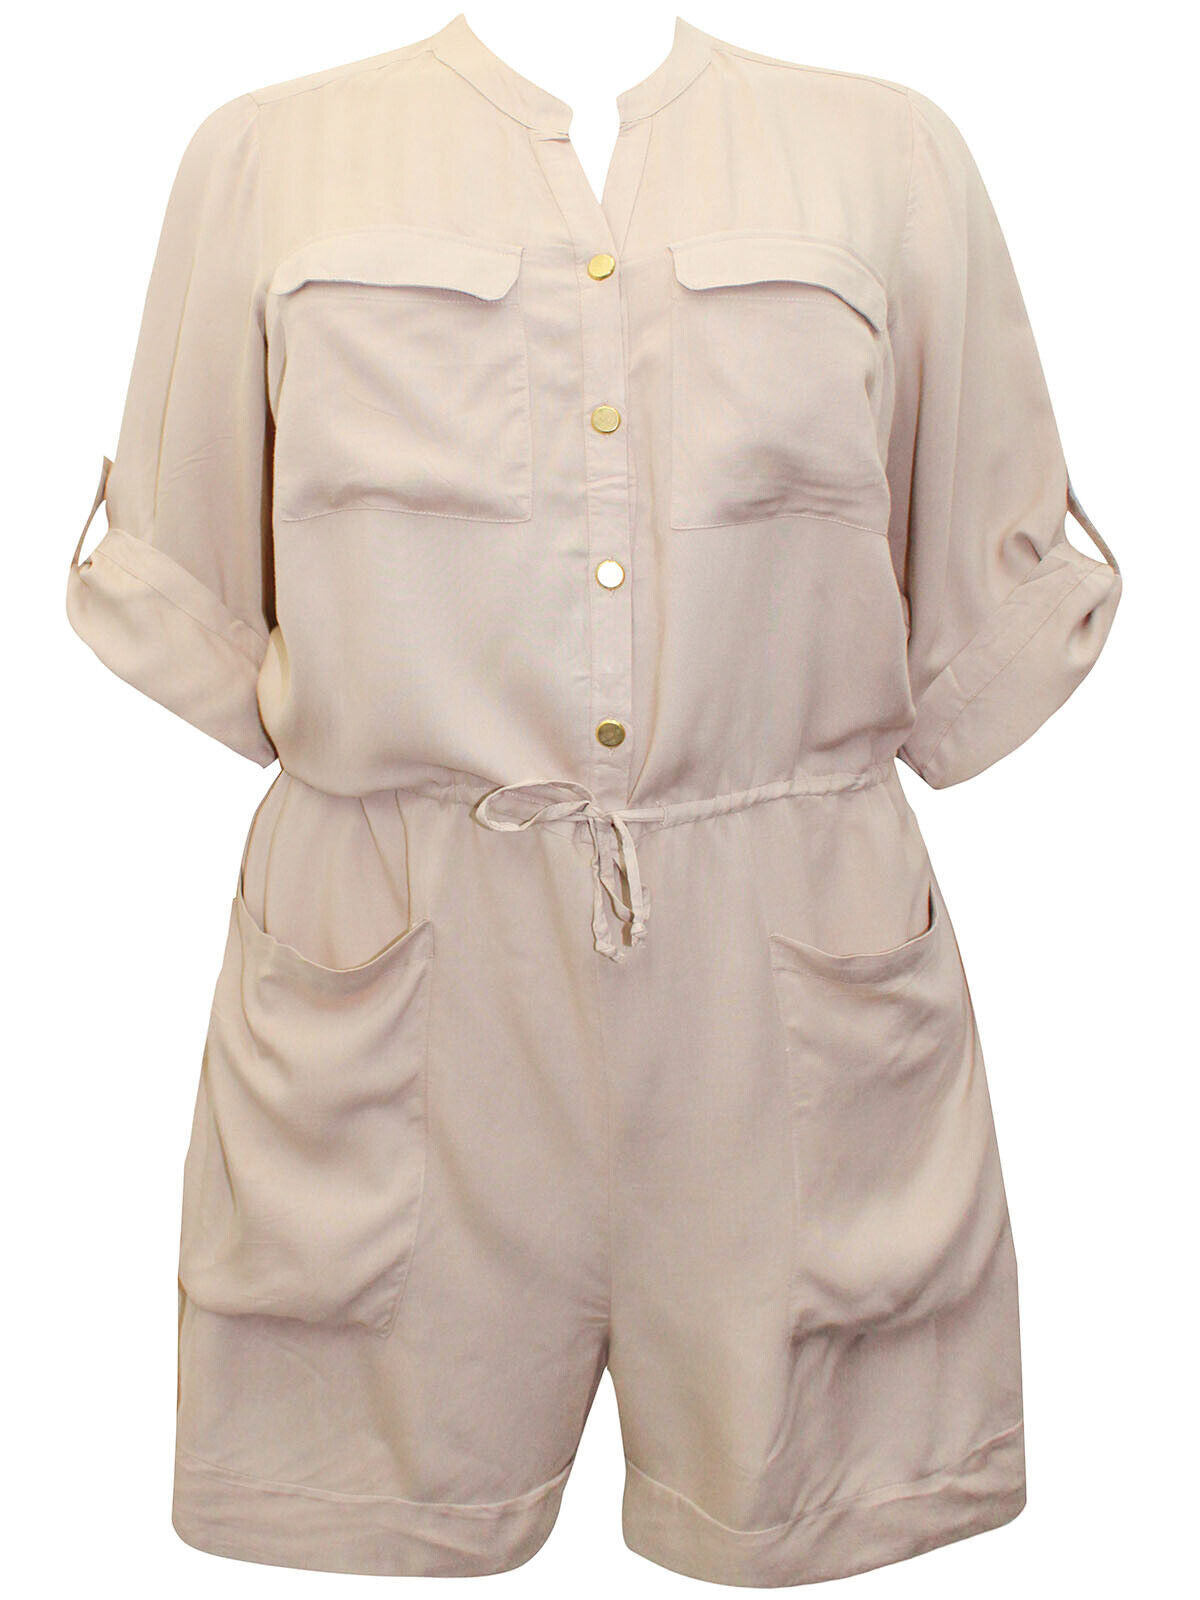 Simply Be Stone Utility Playsuit in Sizes 18, 20, 22, 26, 28, 30, 32